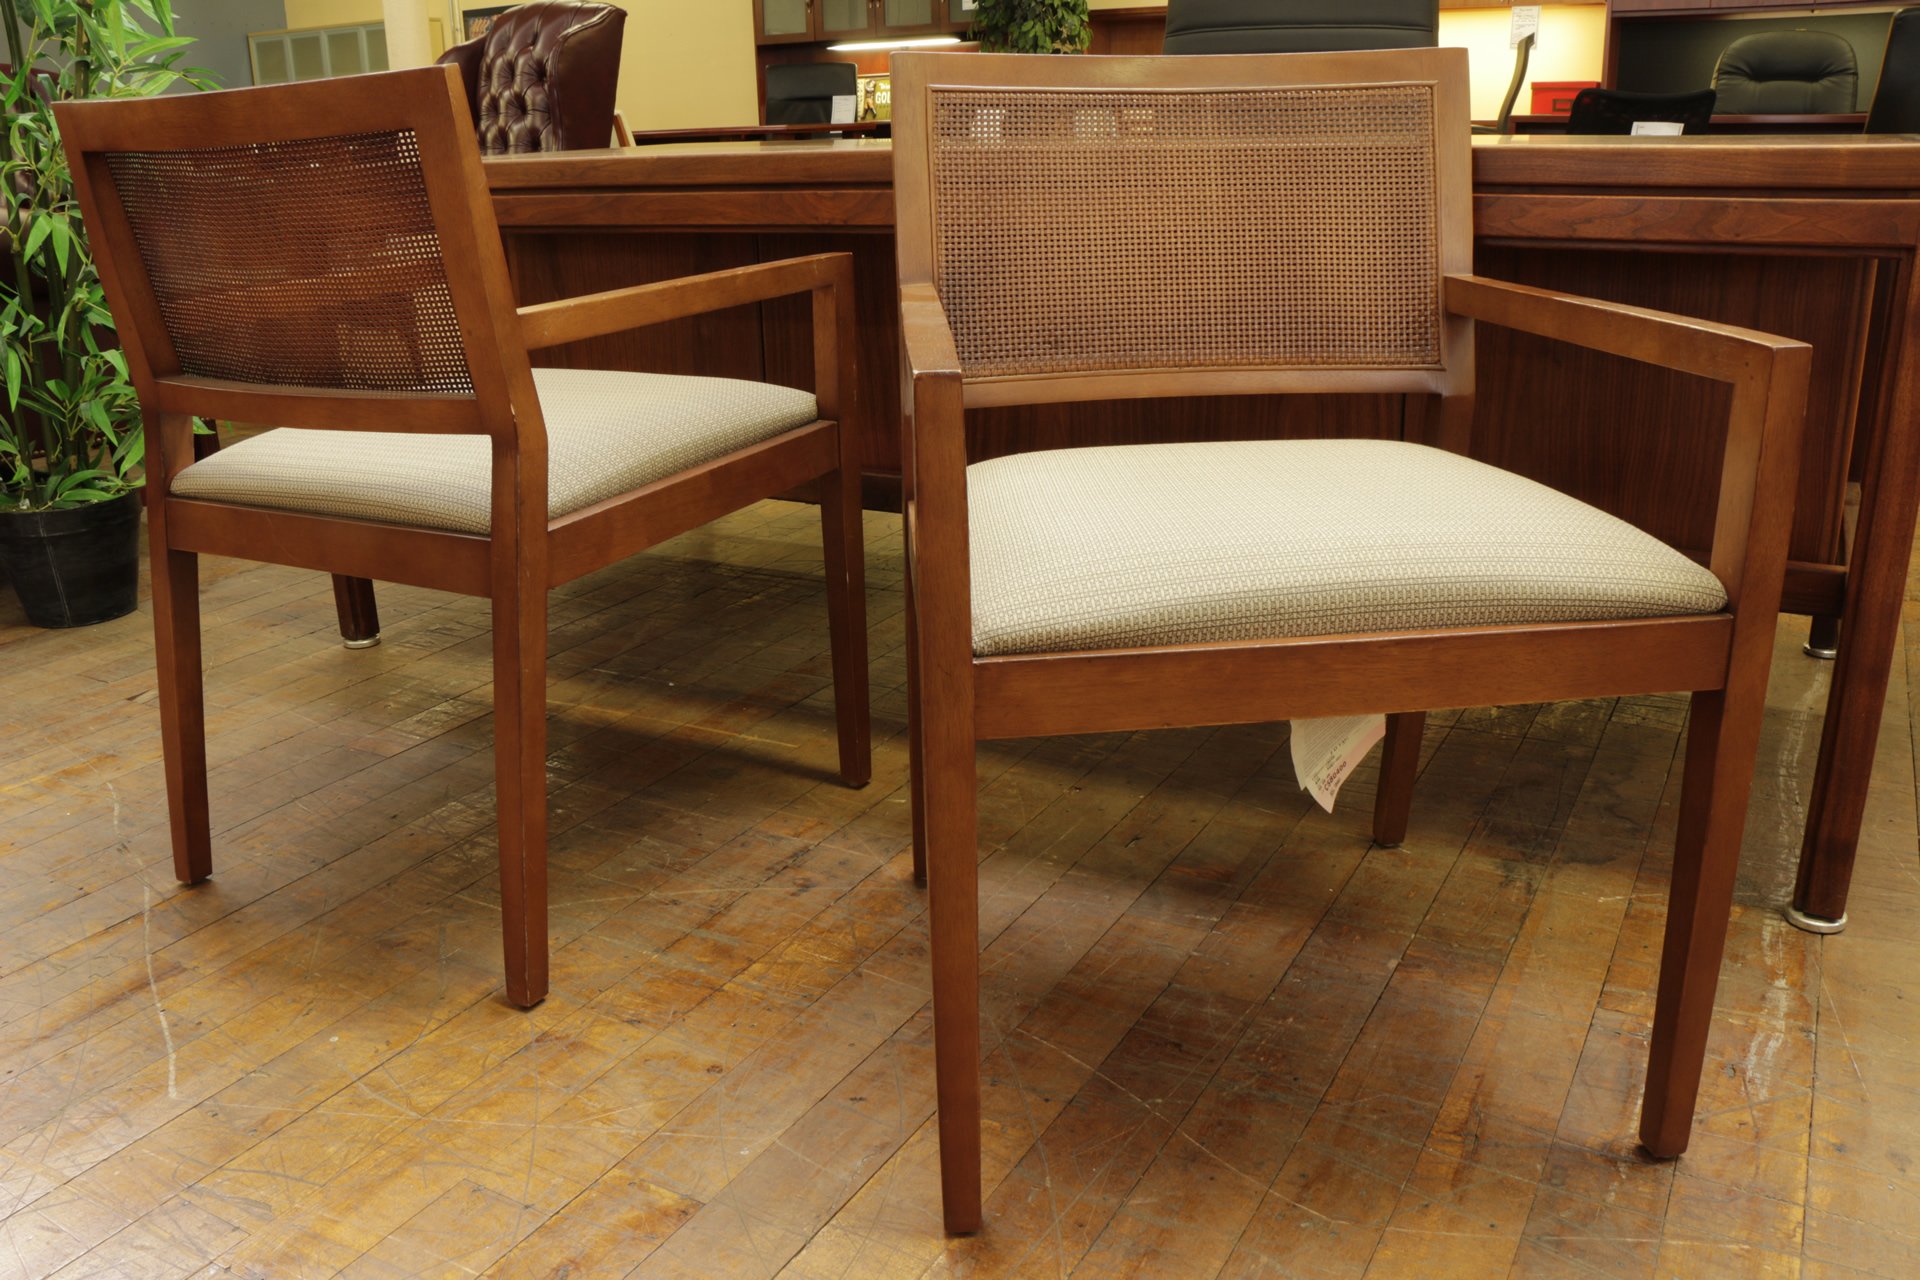 Bernhardt “Clark” Parawood Side Chairs with Woven Cane Back